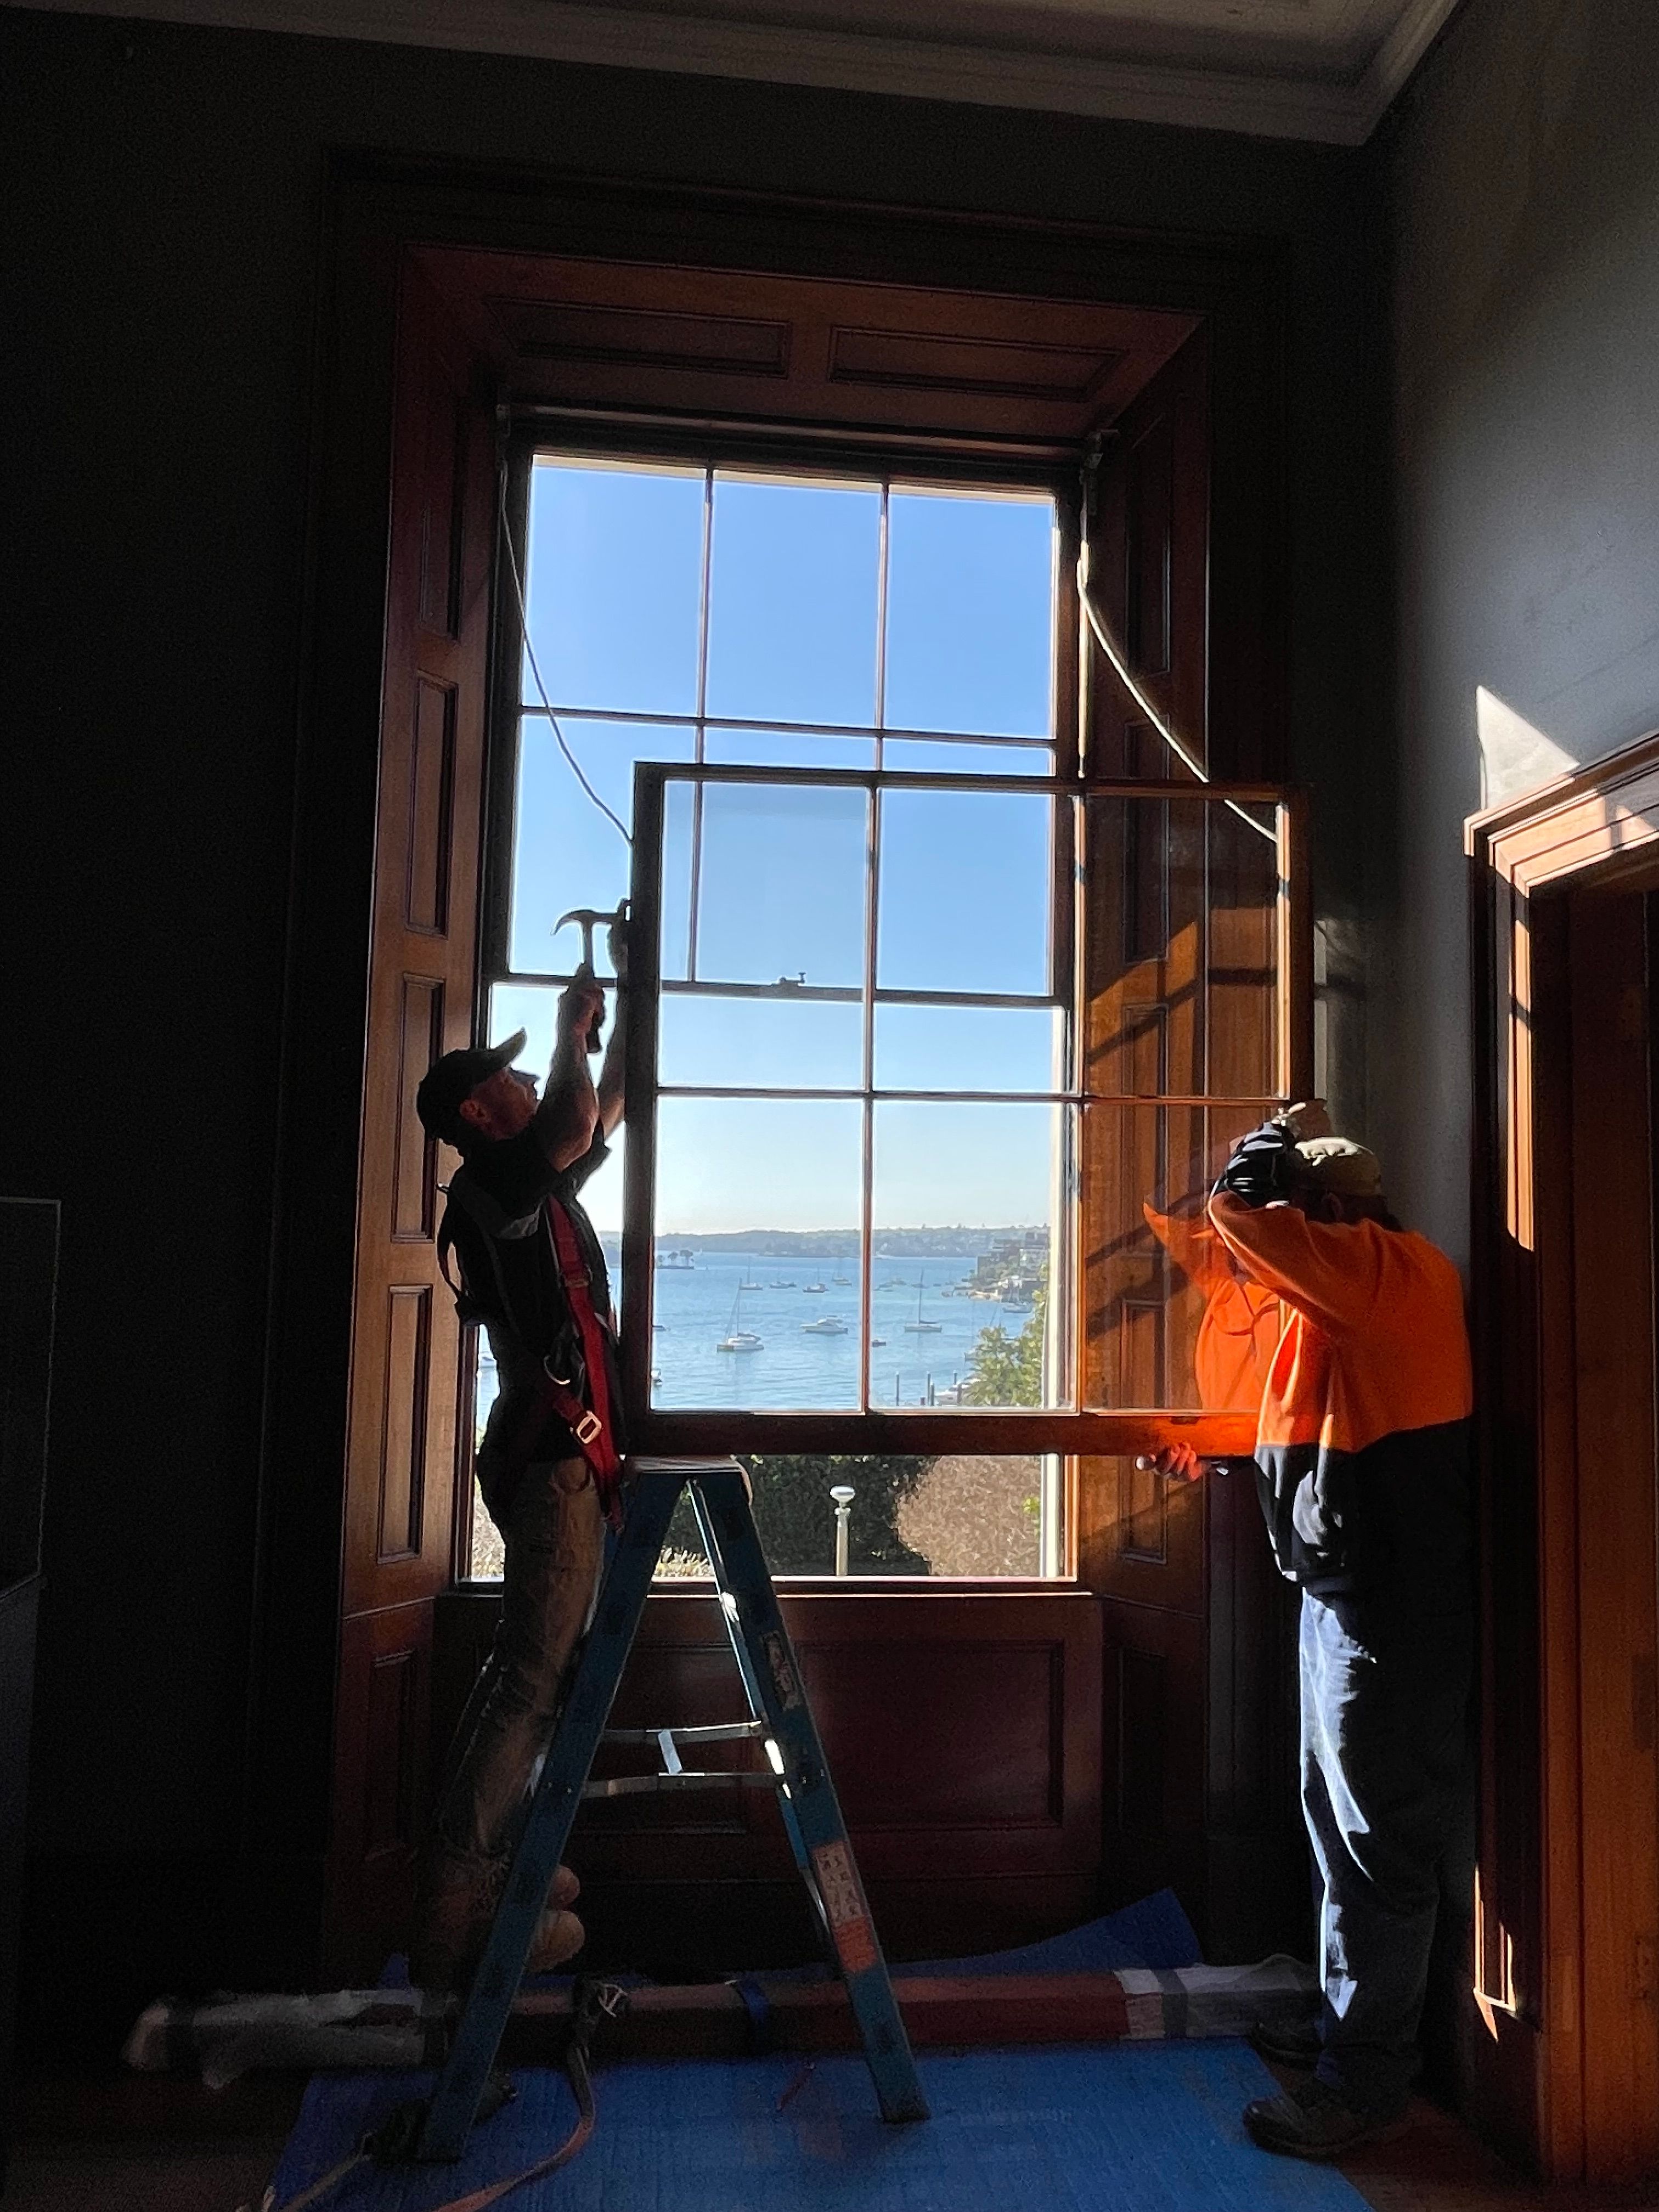 Conservation joiner nailing sash cords onto bottom sash in preparation for installation